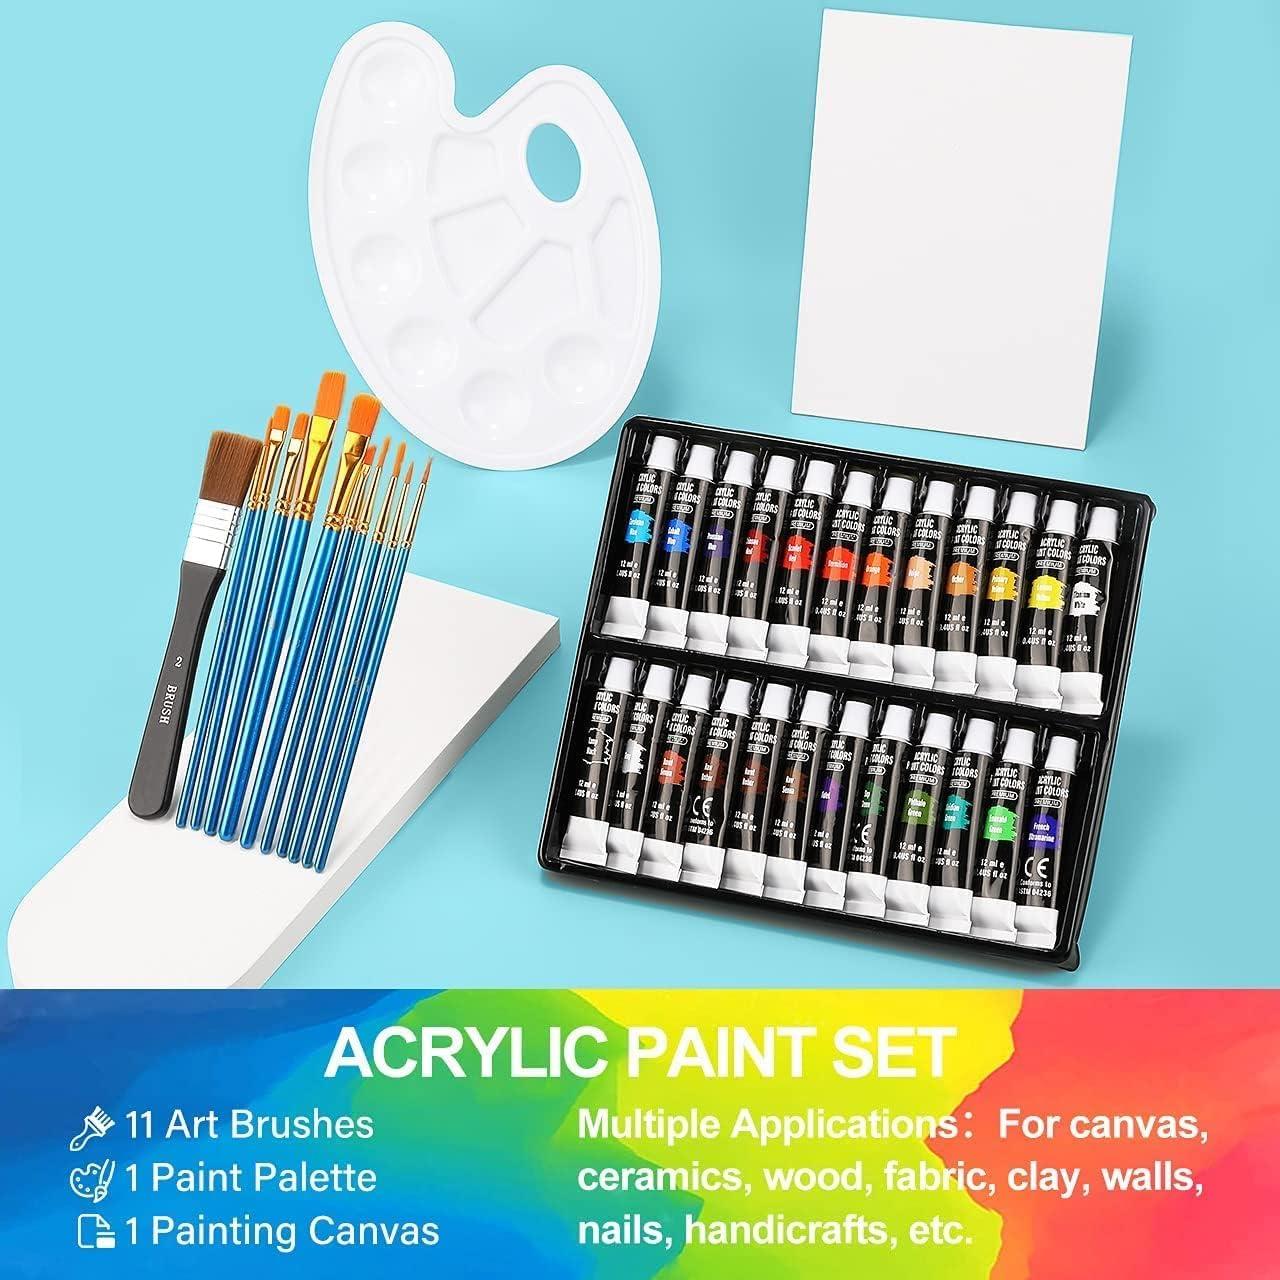 Acrylic Paint Set, 10 Tubes of 4 Oz / 120mL, Emooqi Professional Grade Painting  Kit with Paint Brushes, for Wood, Arts and Crafts, Fabric, Painting  Supplies for Adults and Children — emooqi